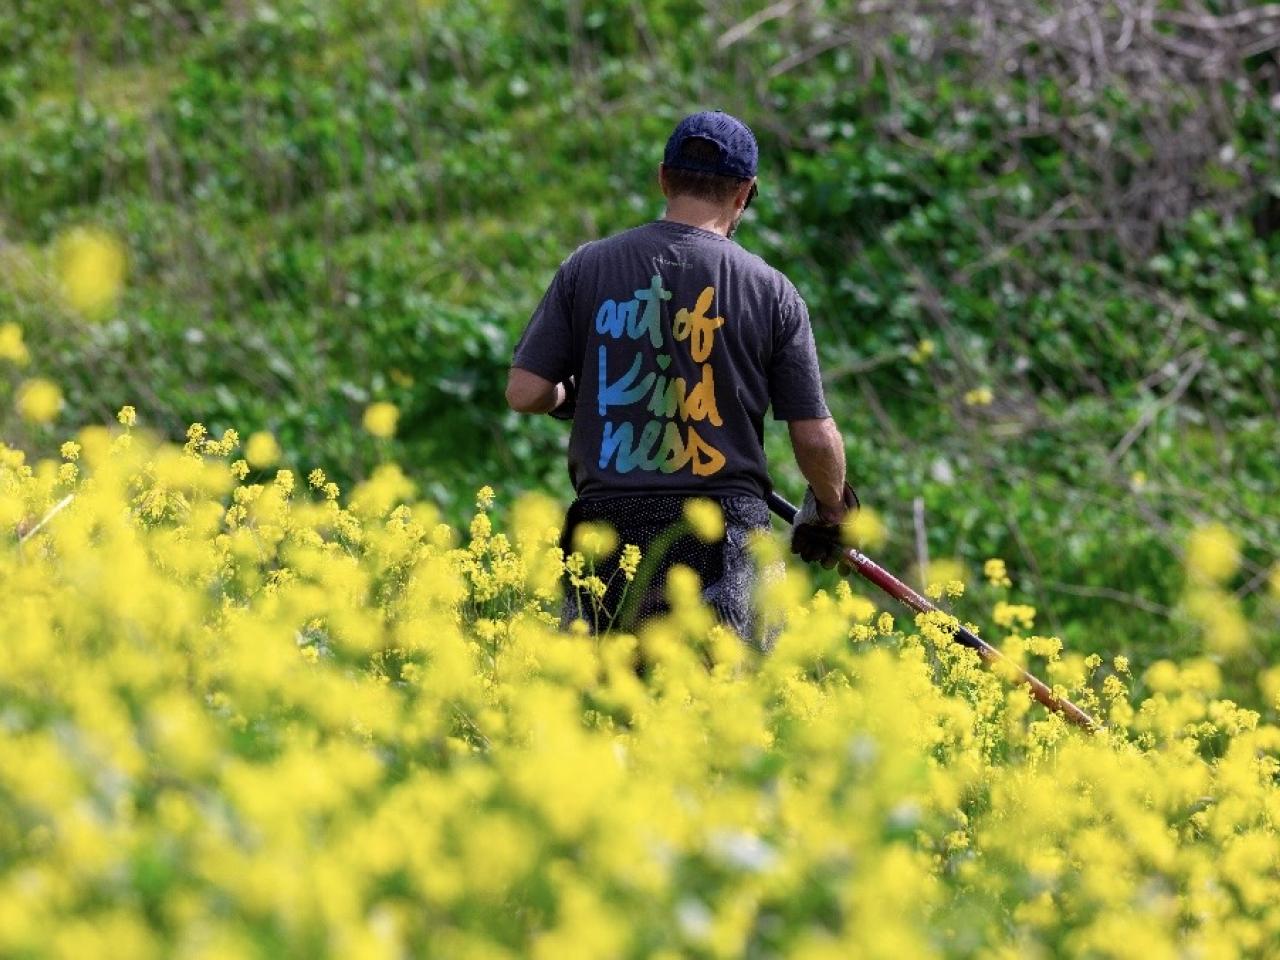 A person with their back to the camera in a field of yellow flowers. They are wearing a shirt with "the art of kindness" on the back.